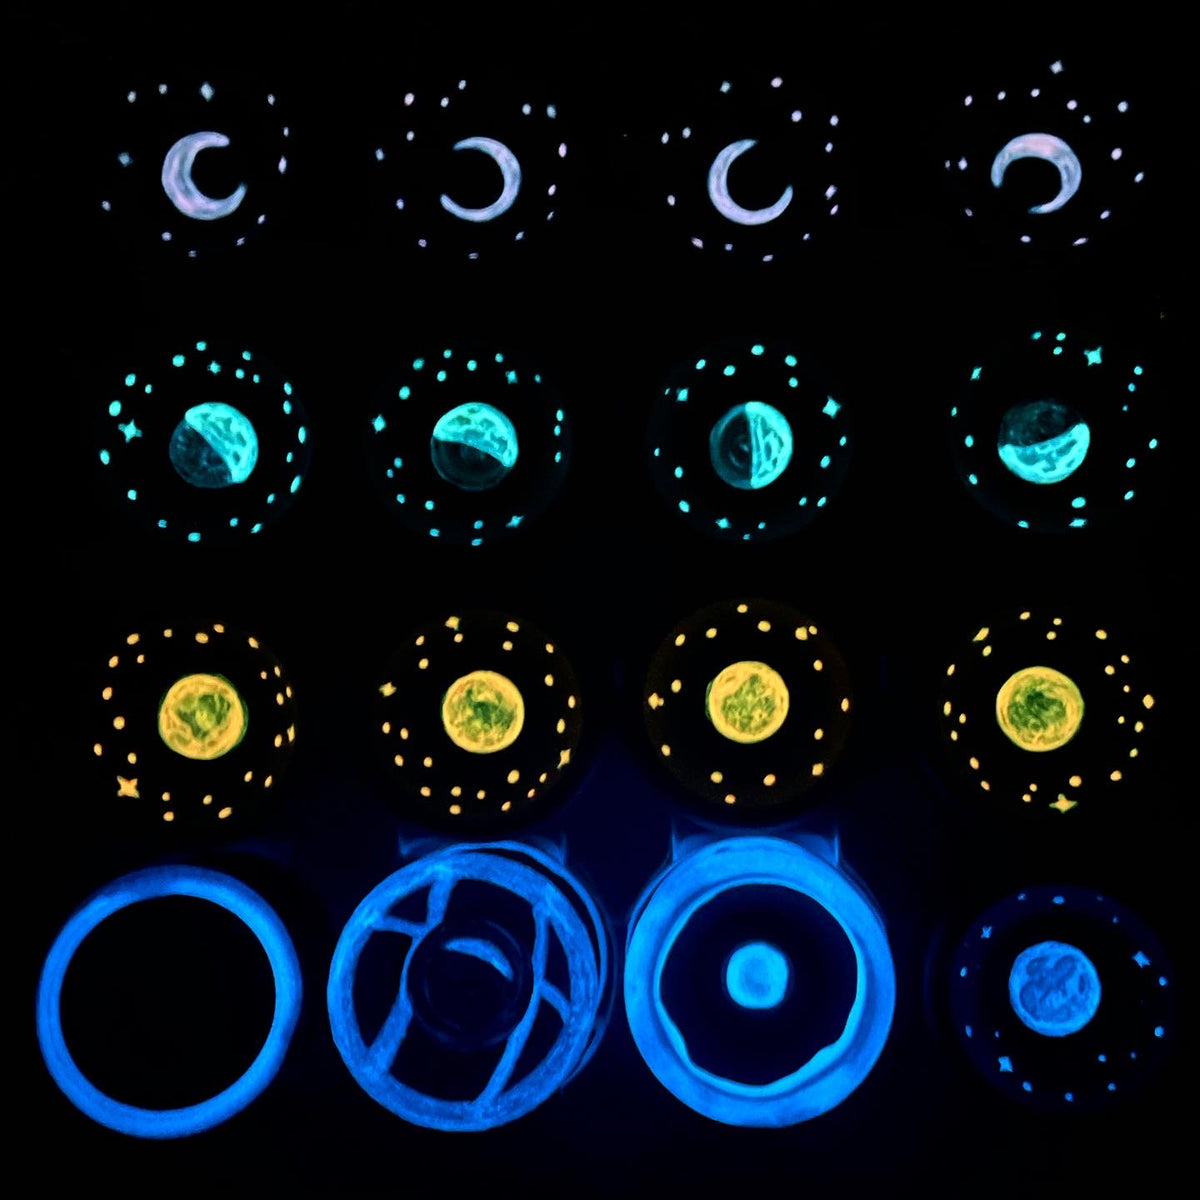 Glowing Void Edition Perspective: Moonphase